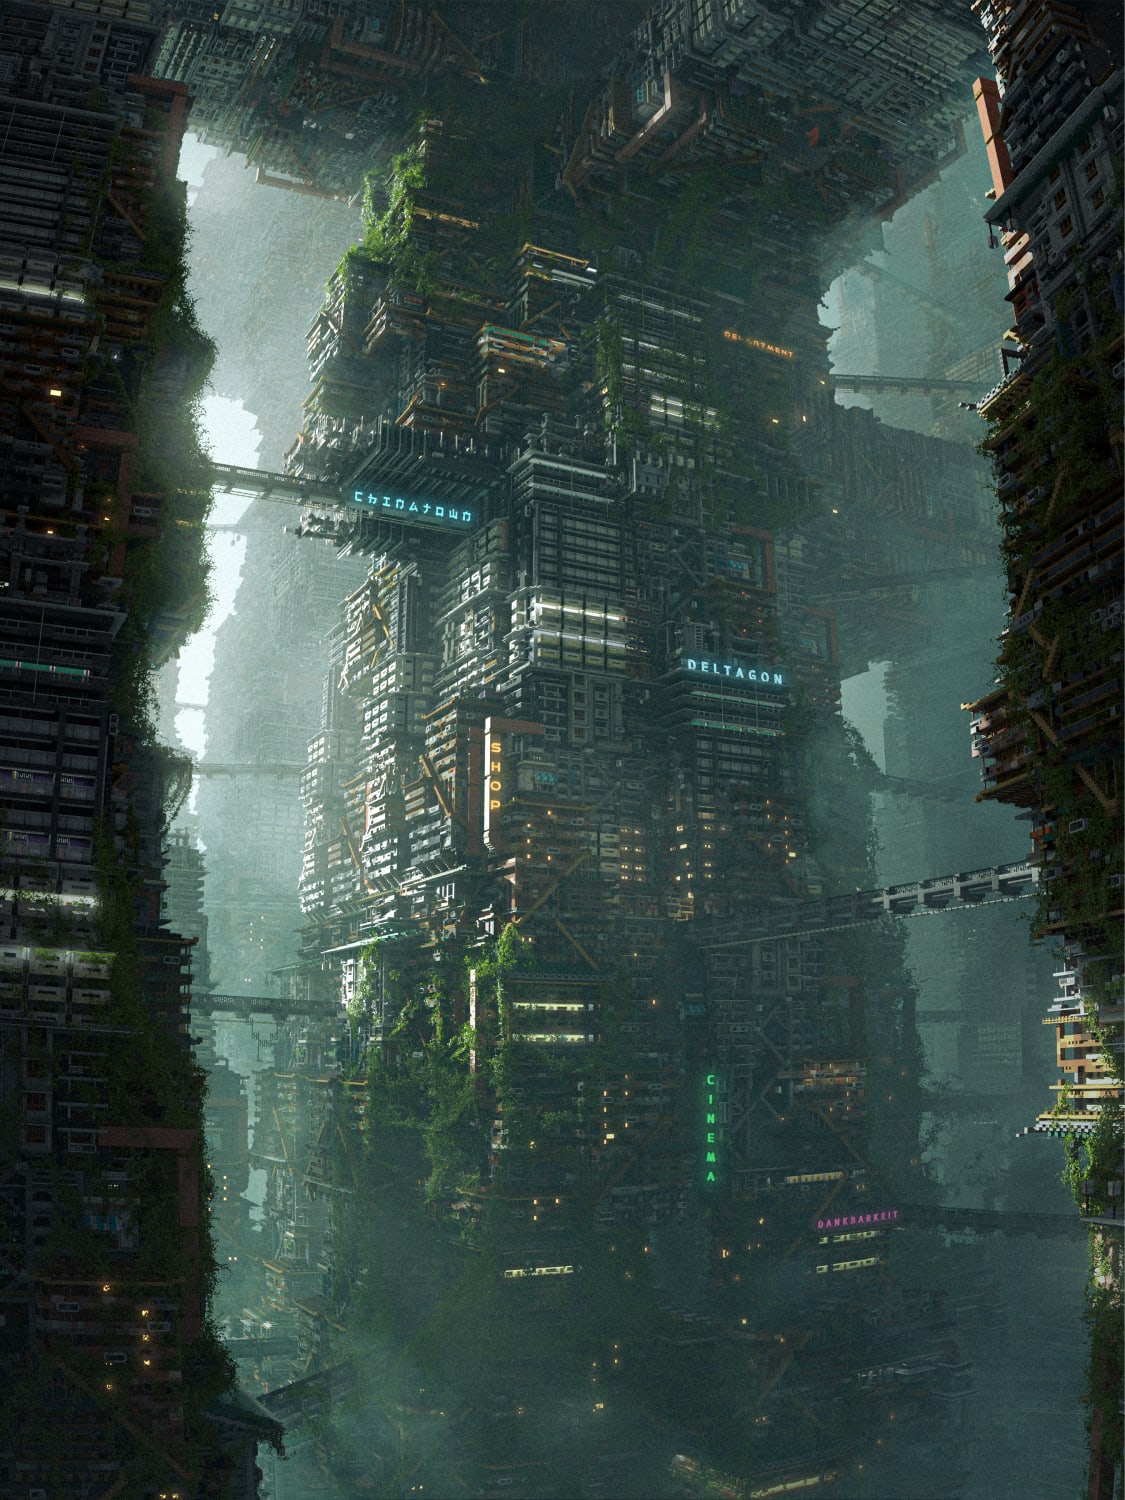 I made a overgrown Sci Fi Scene out of a Minecraft Build by Deltagon